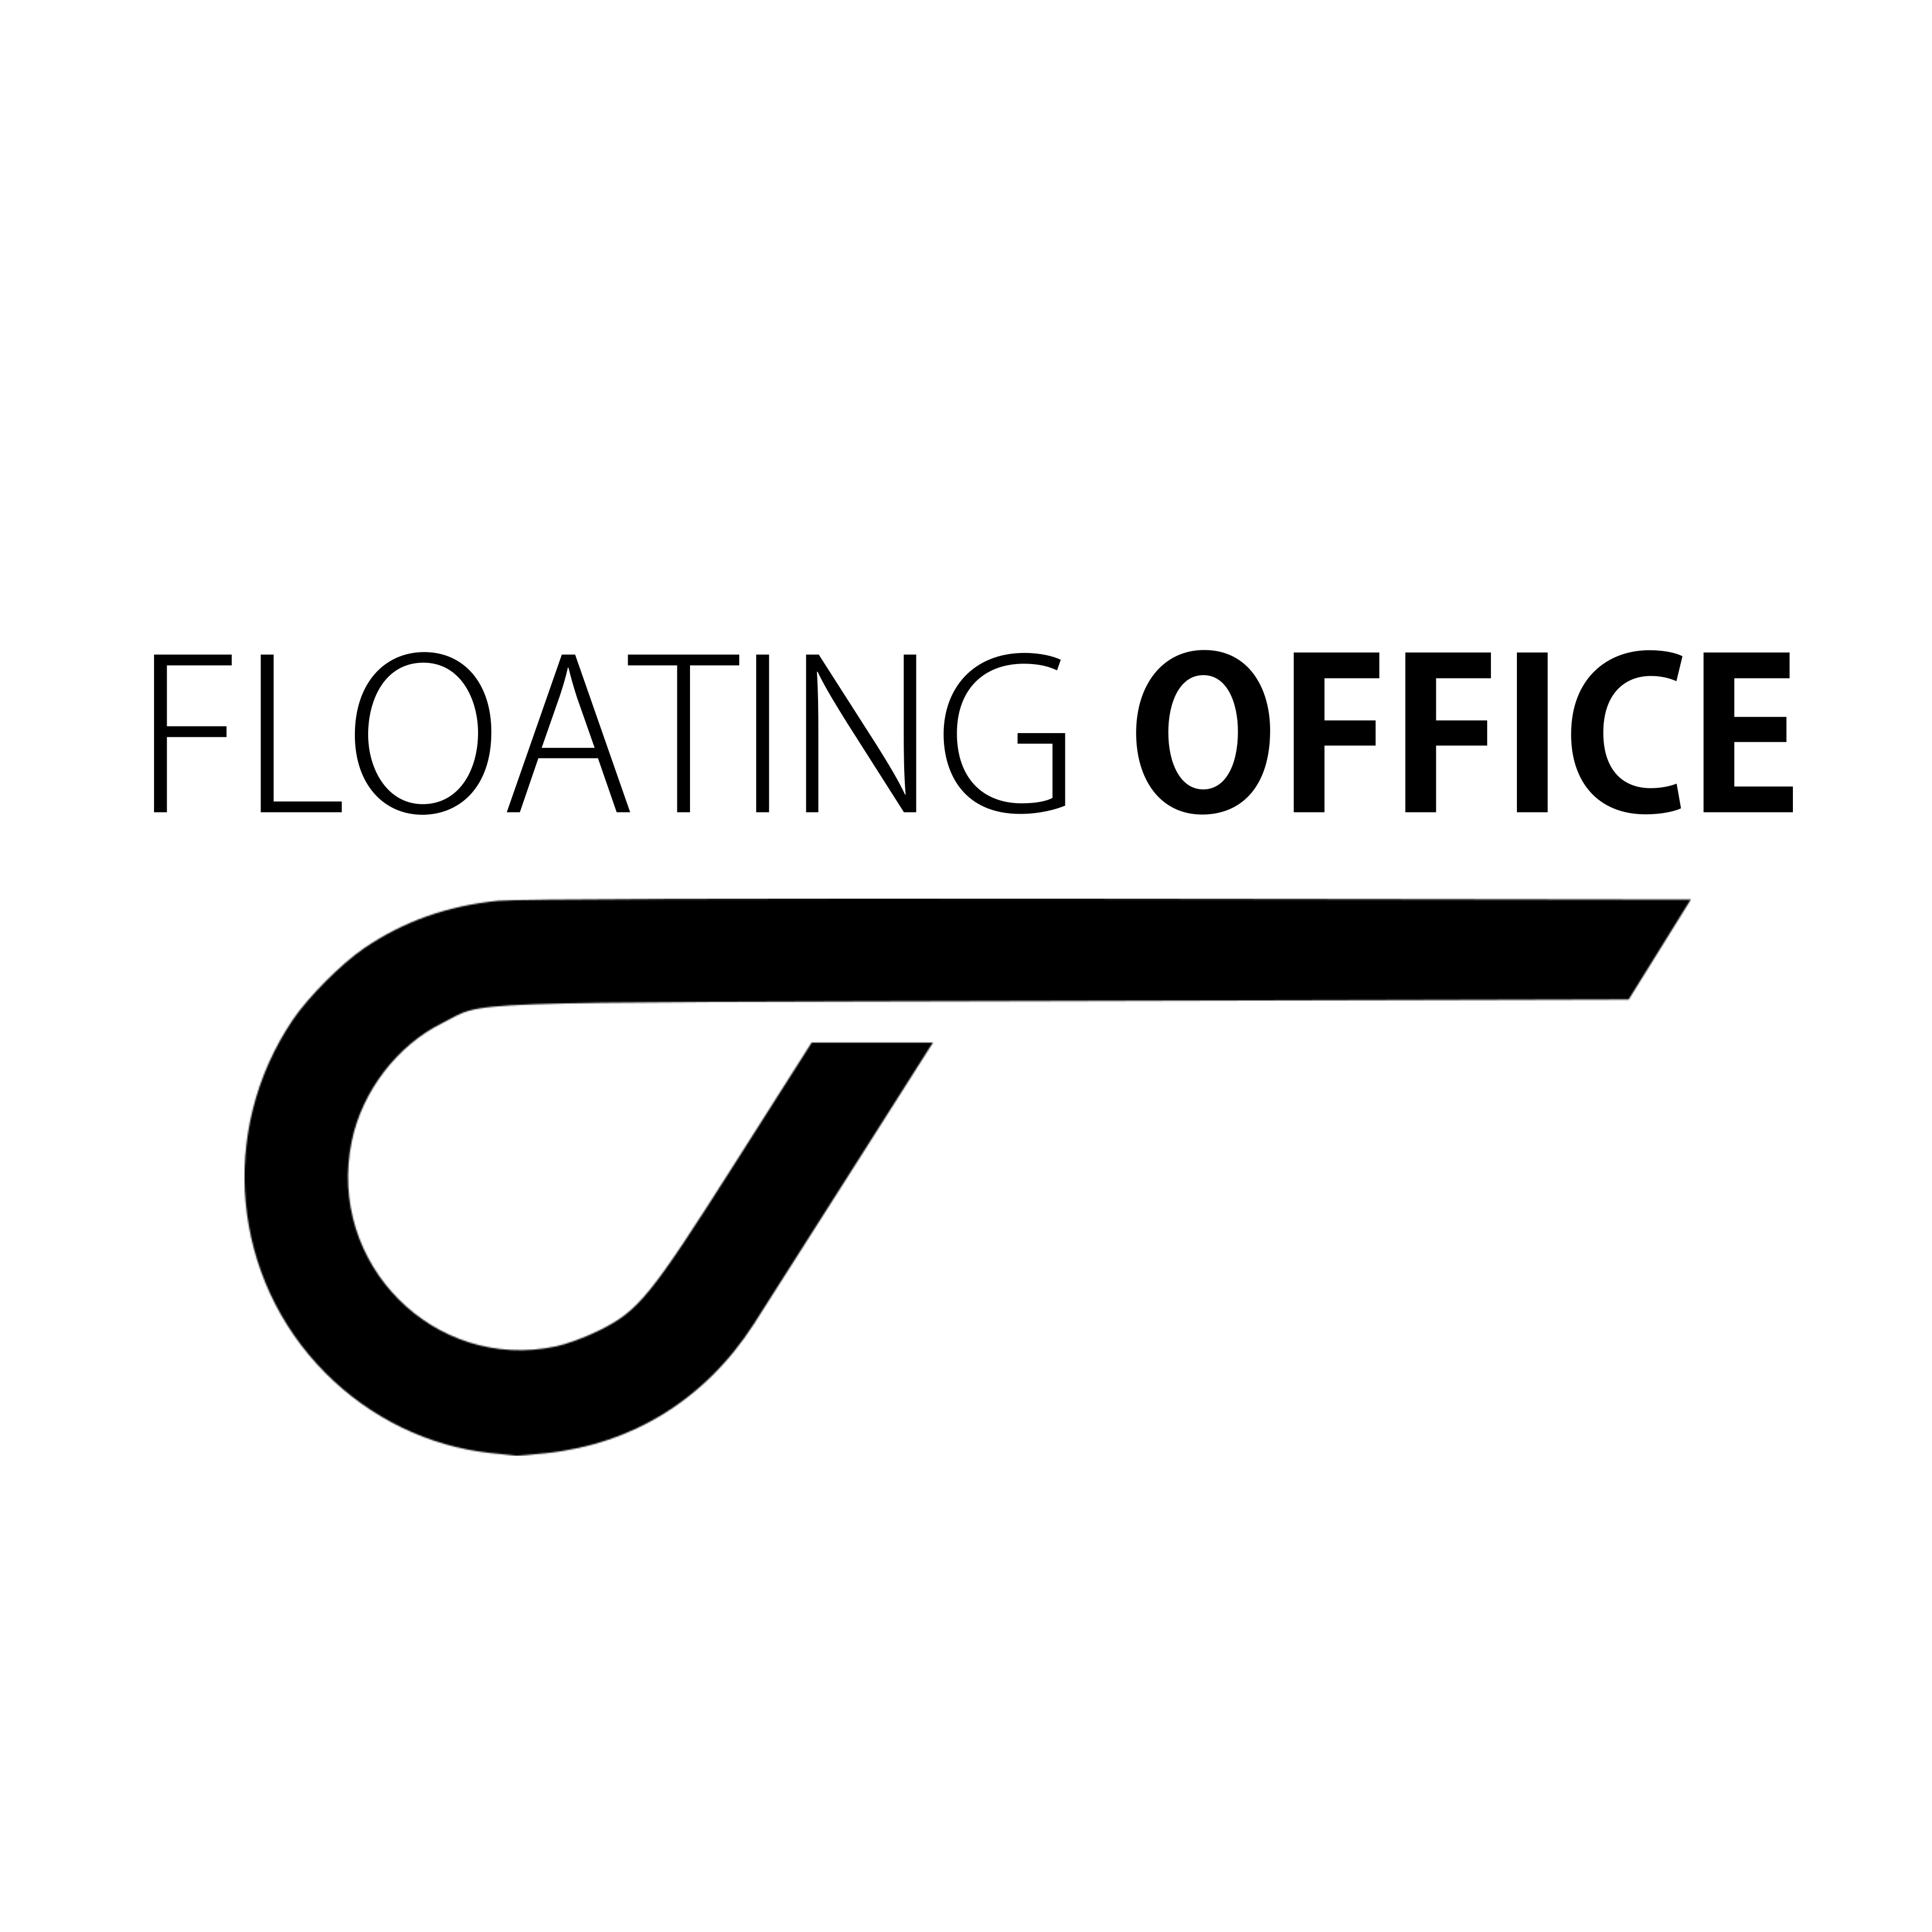 Floating Office